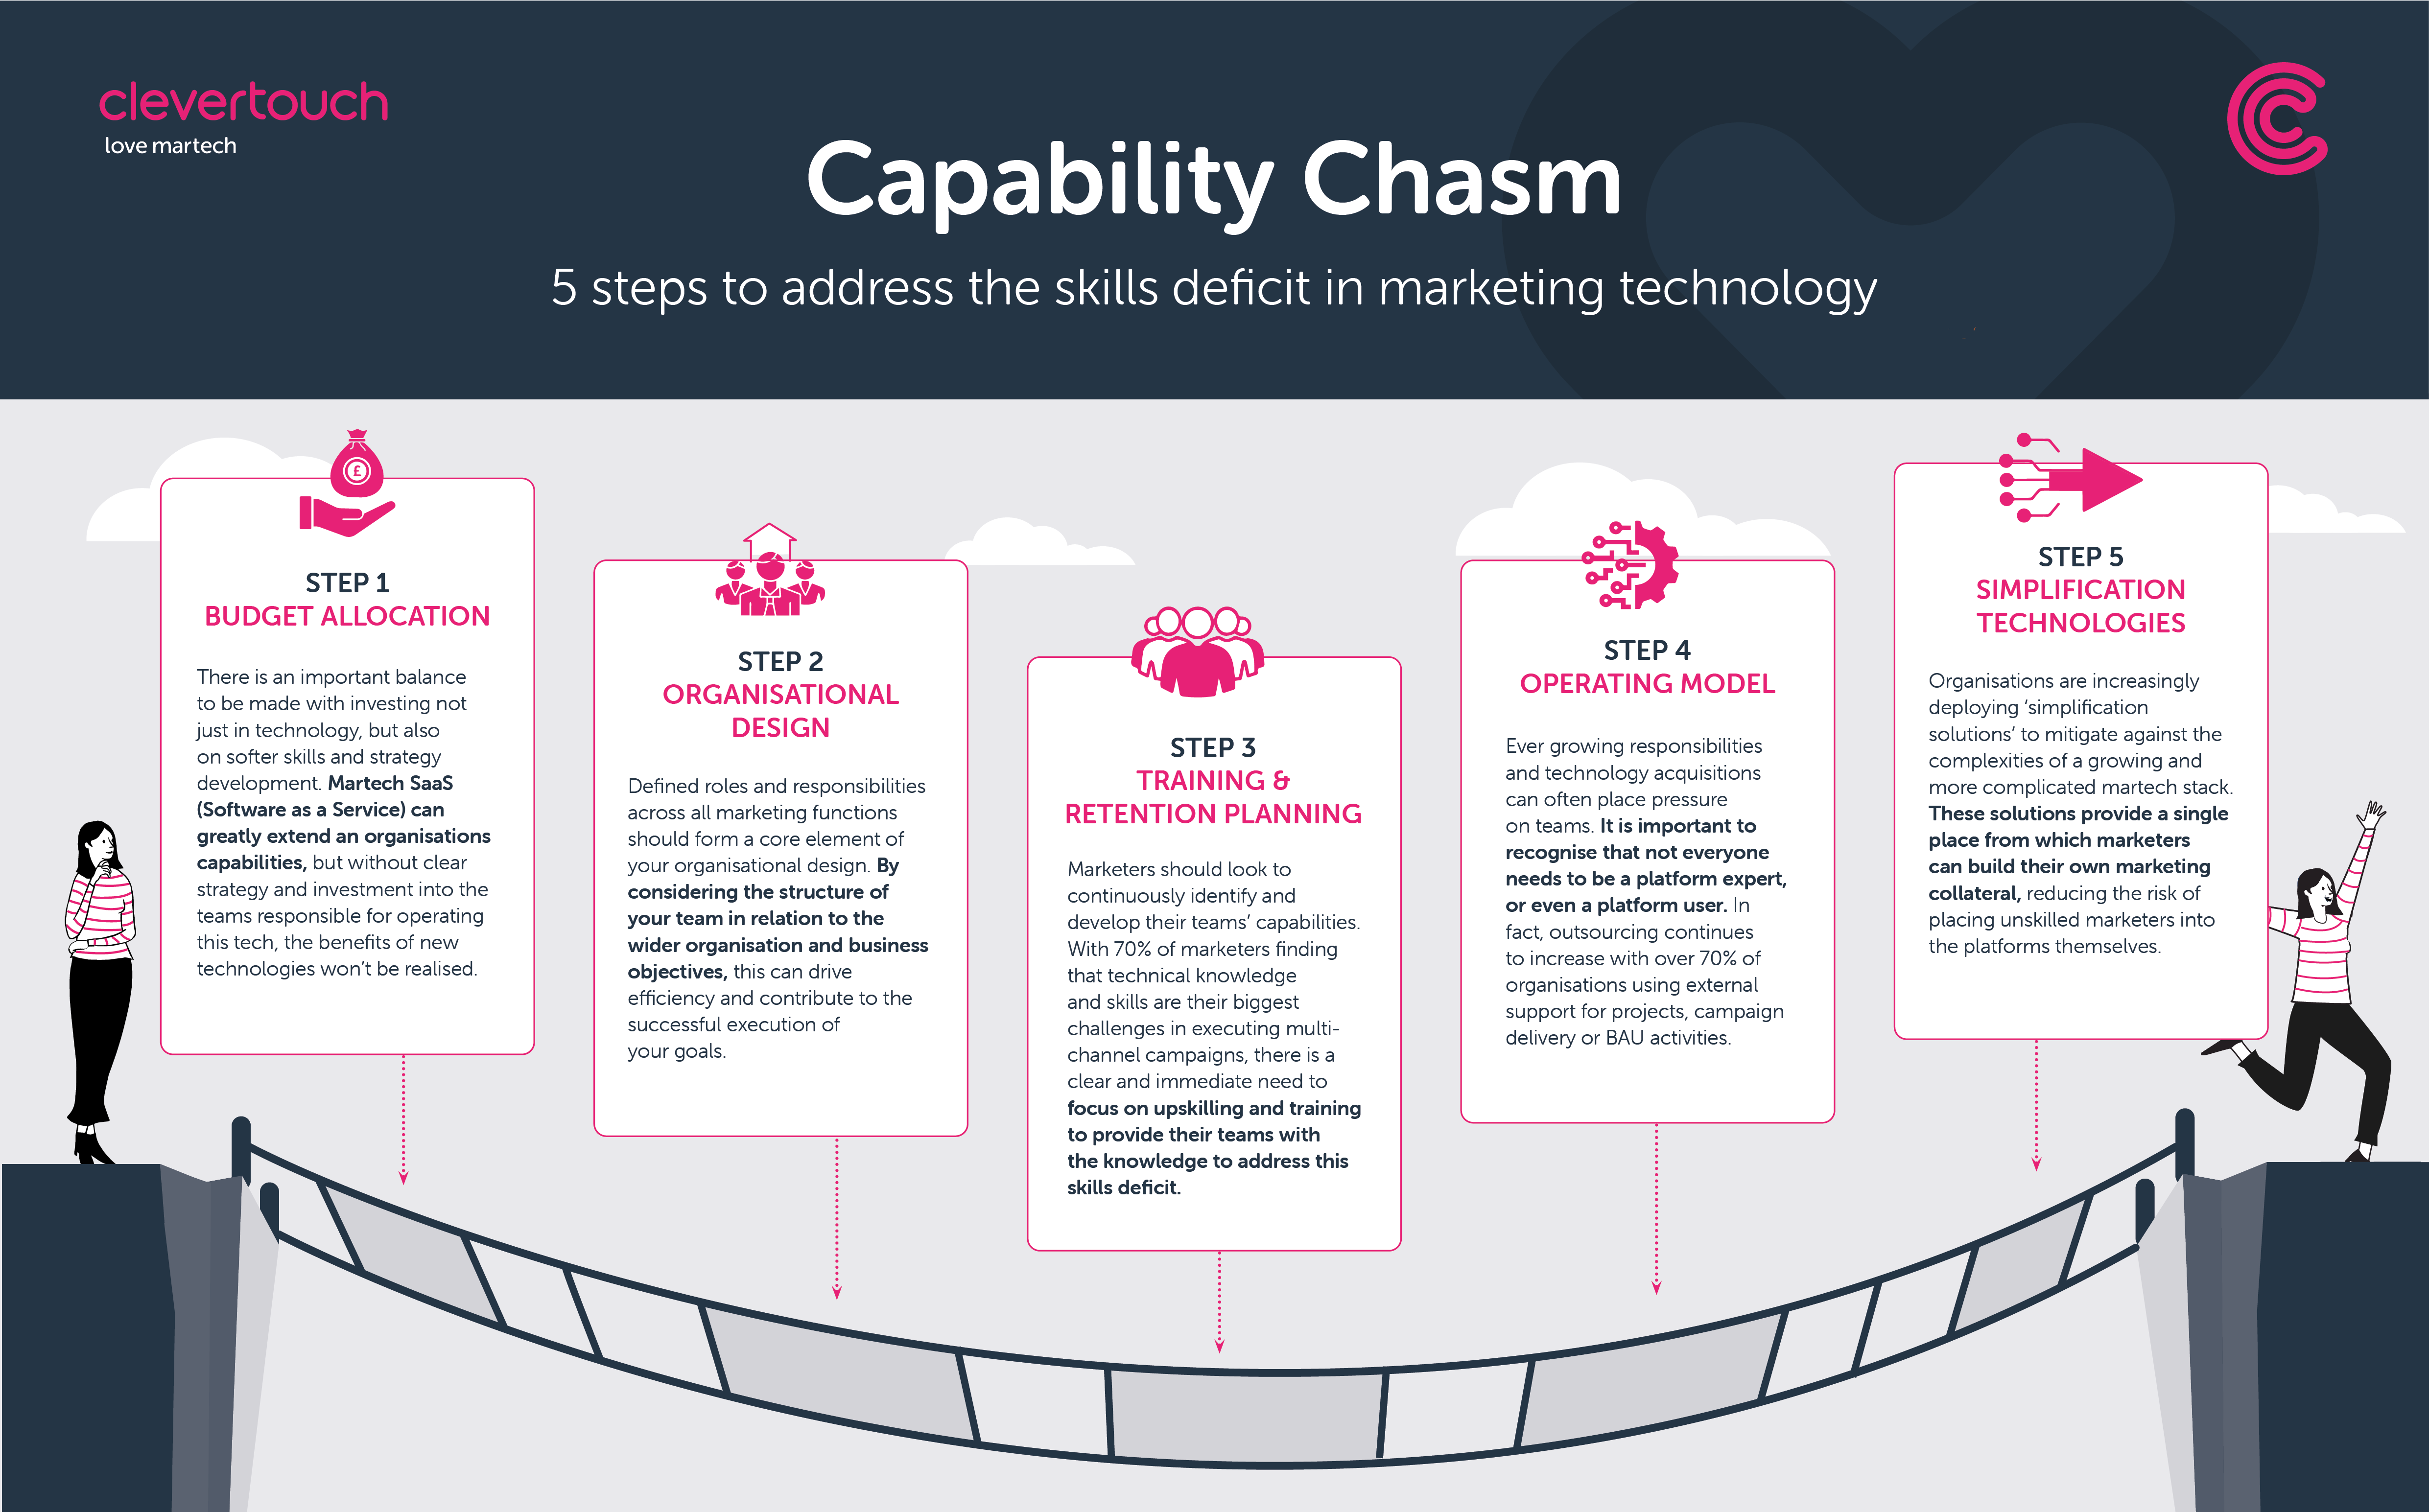 Five steps to address the skills deficit in marketing technology